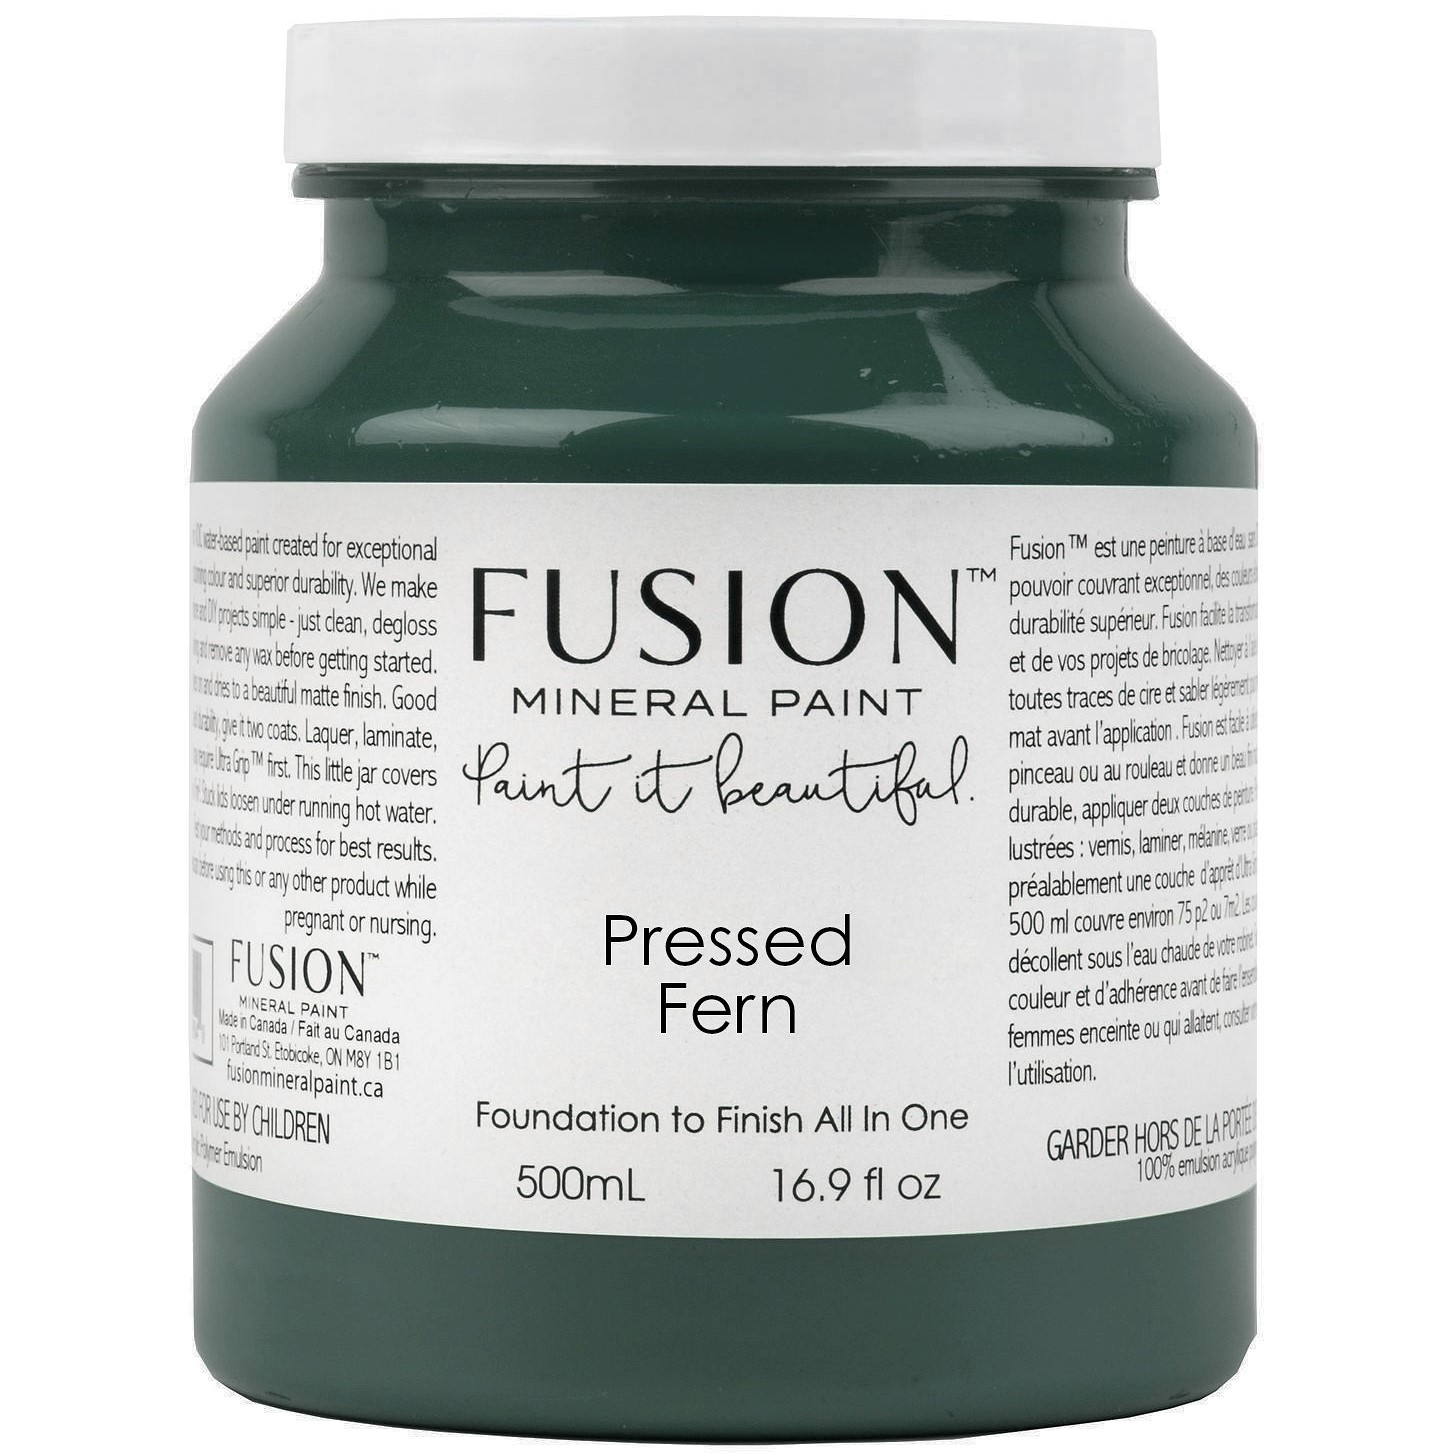 Pressed Fern Fusion Mineral Paint Goed Gestyled Brielle